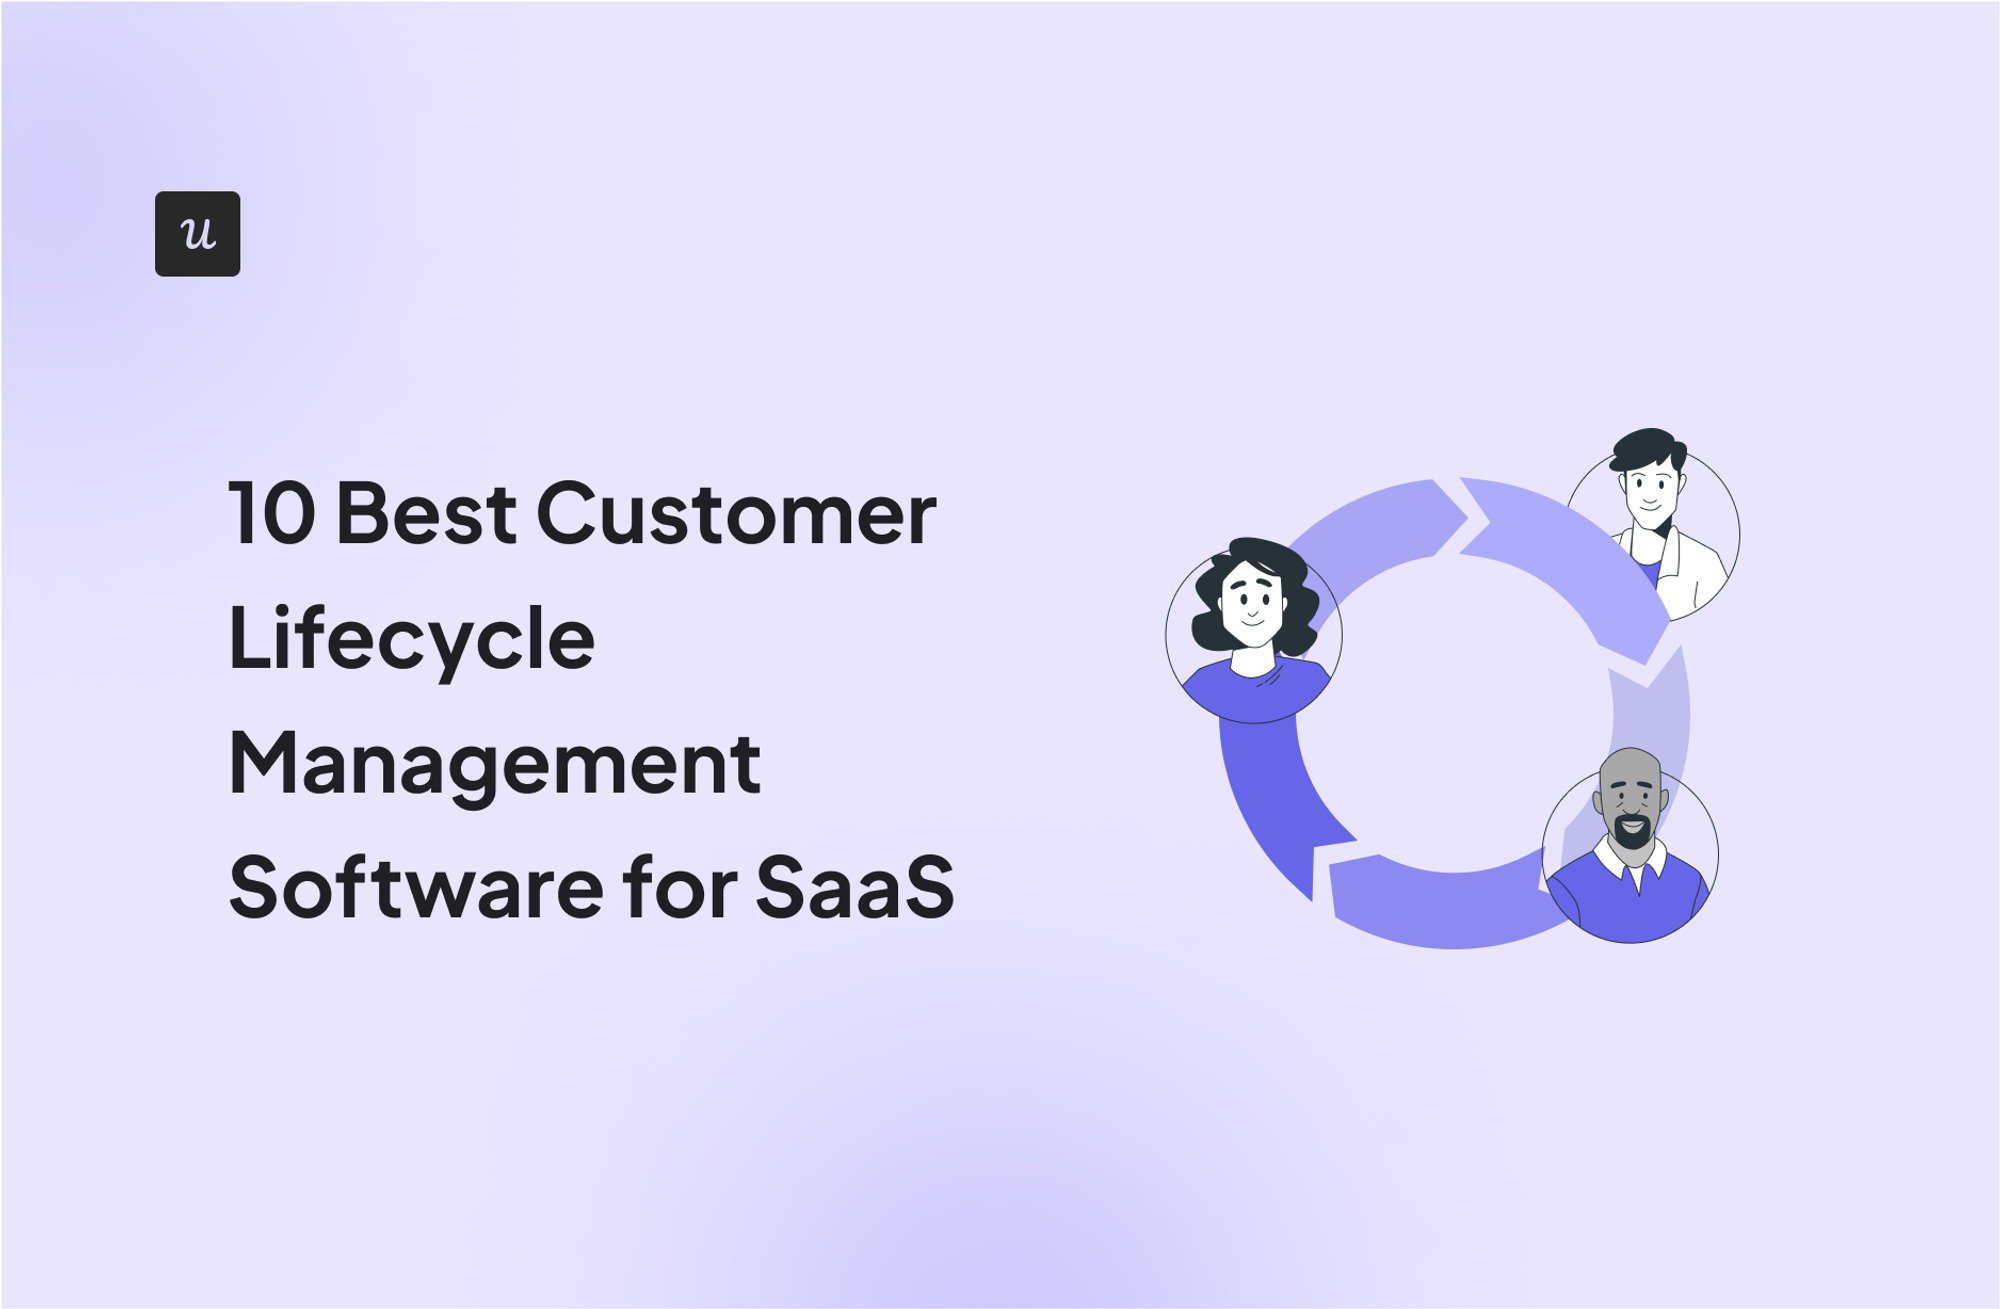 10 Best Customer Lifecycle Management Software for SaaS cover